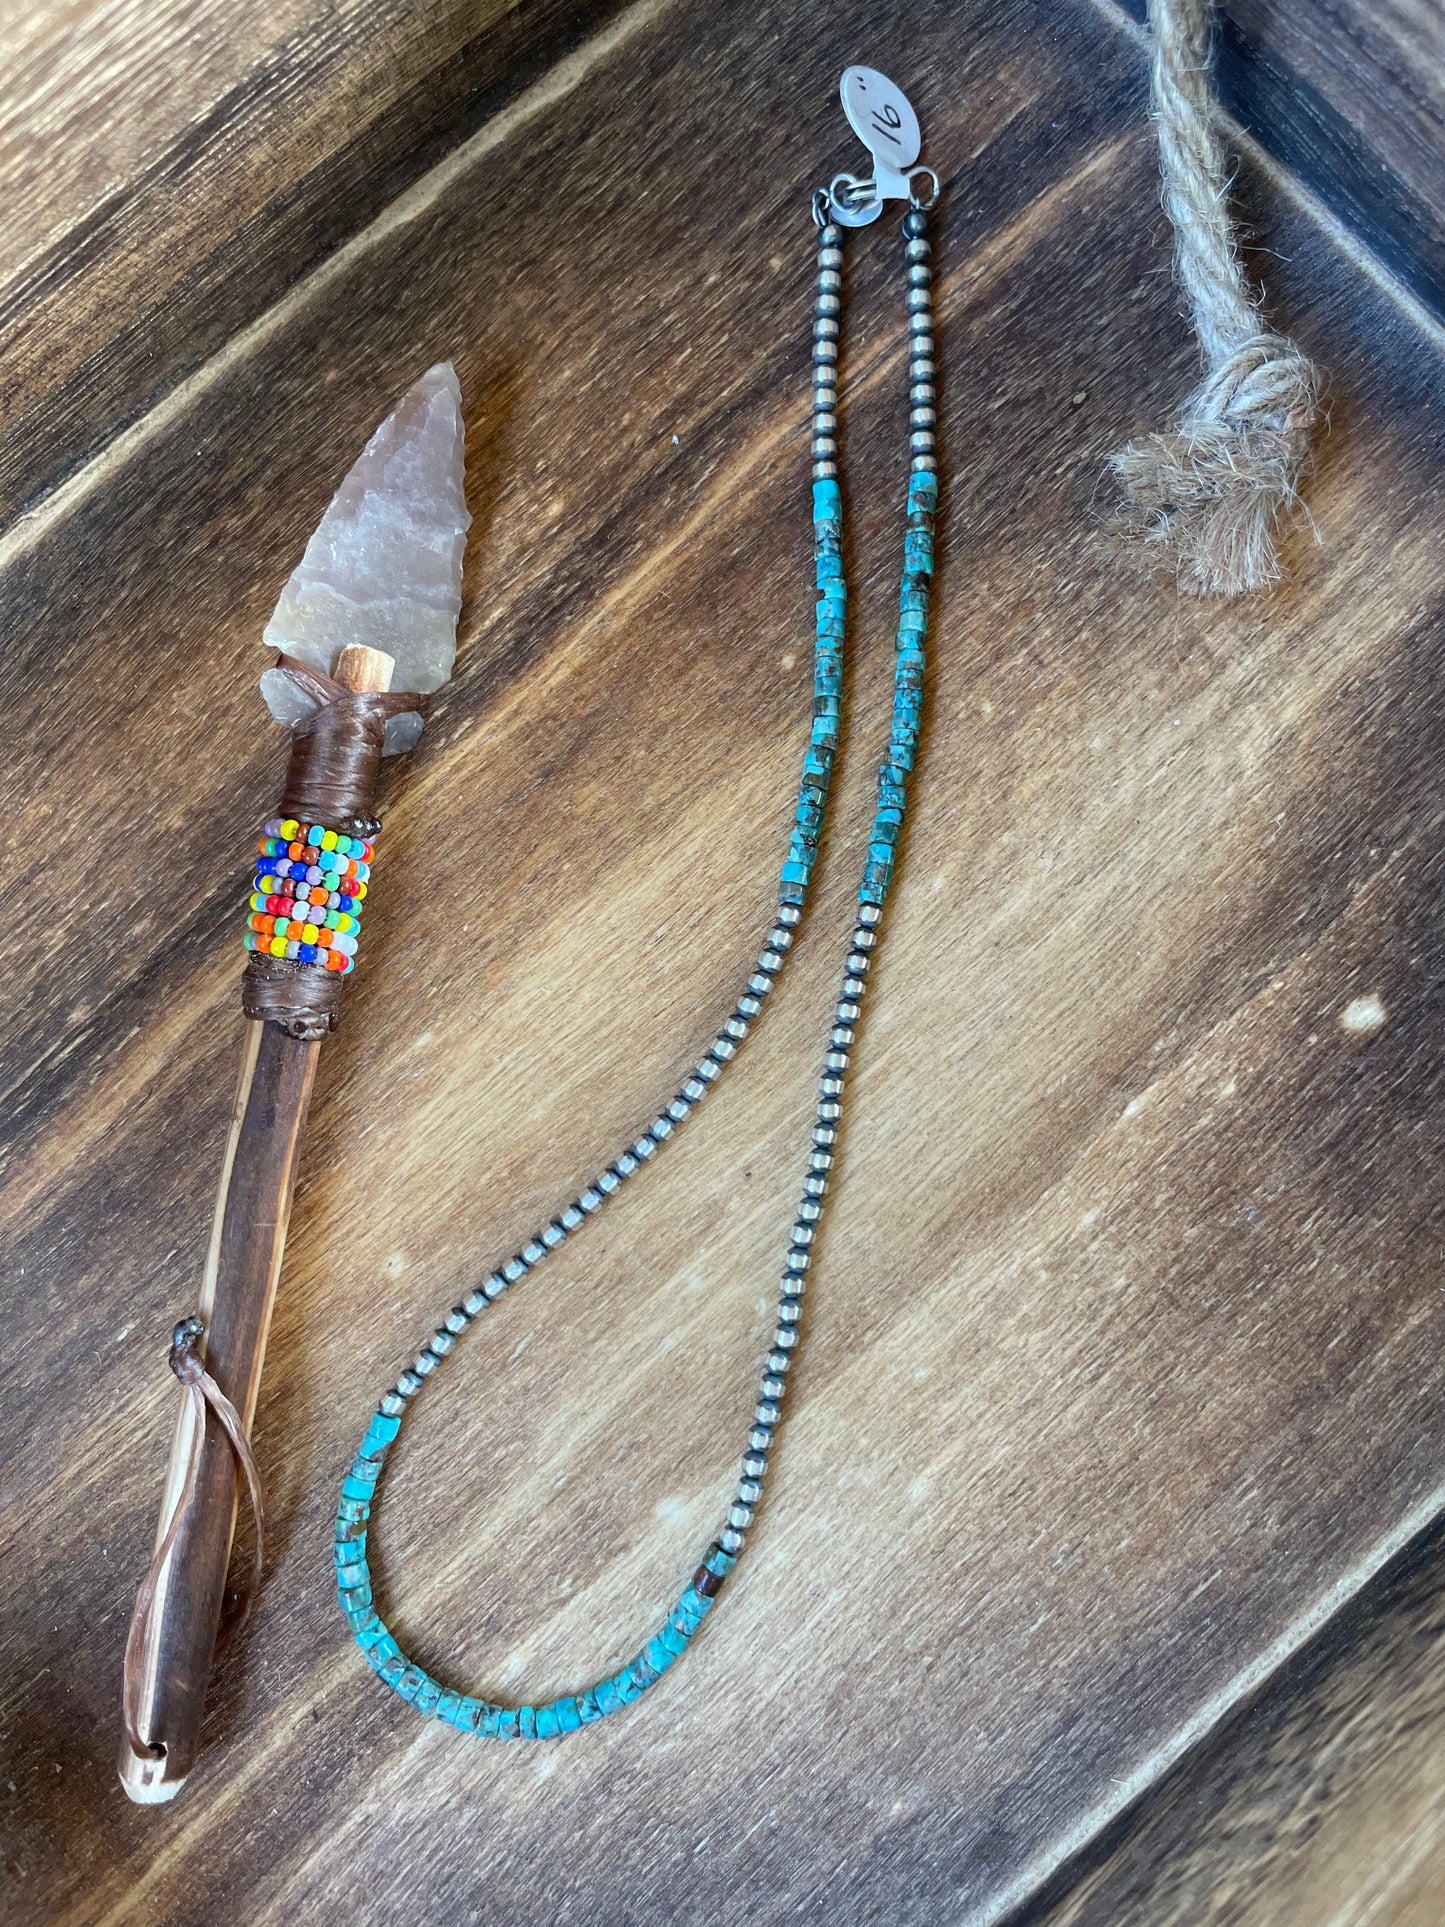 The Lana Navajo Pearl and Turquoise Necklace